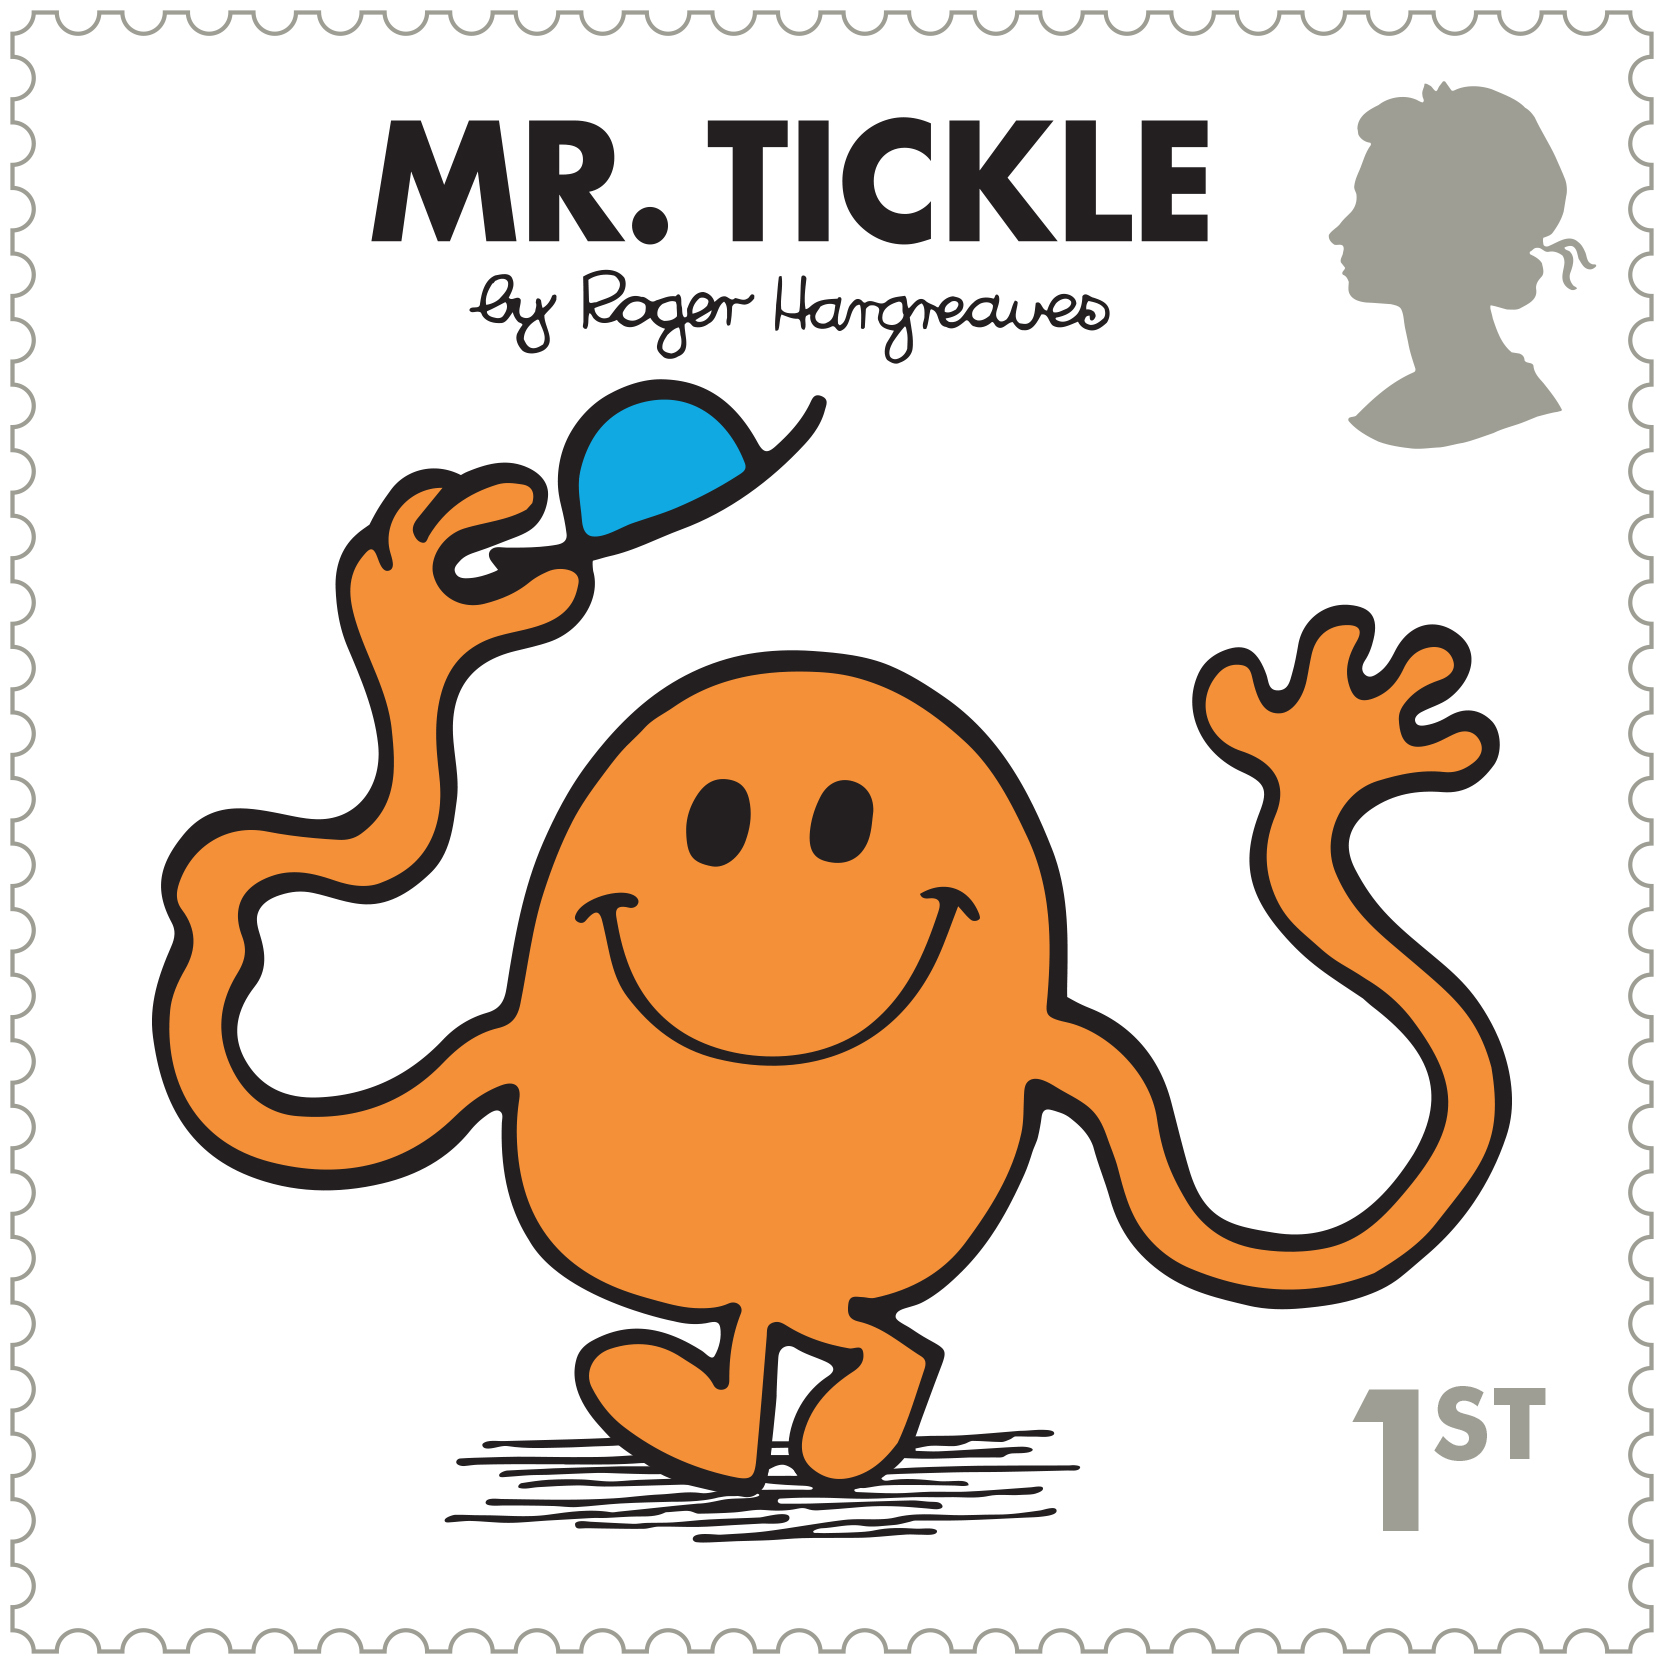 Mr Men and Little Miss stamps - Mr Tickle (Royal Mail/PA)